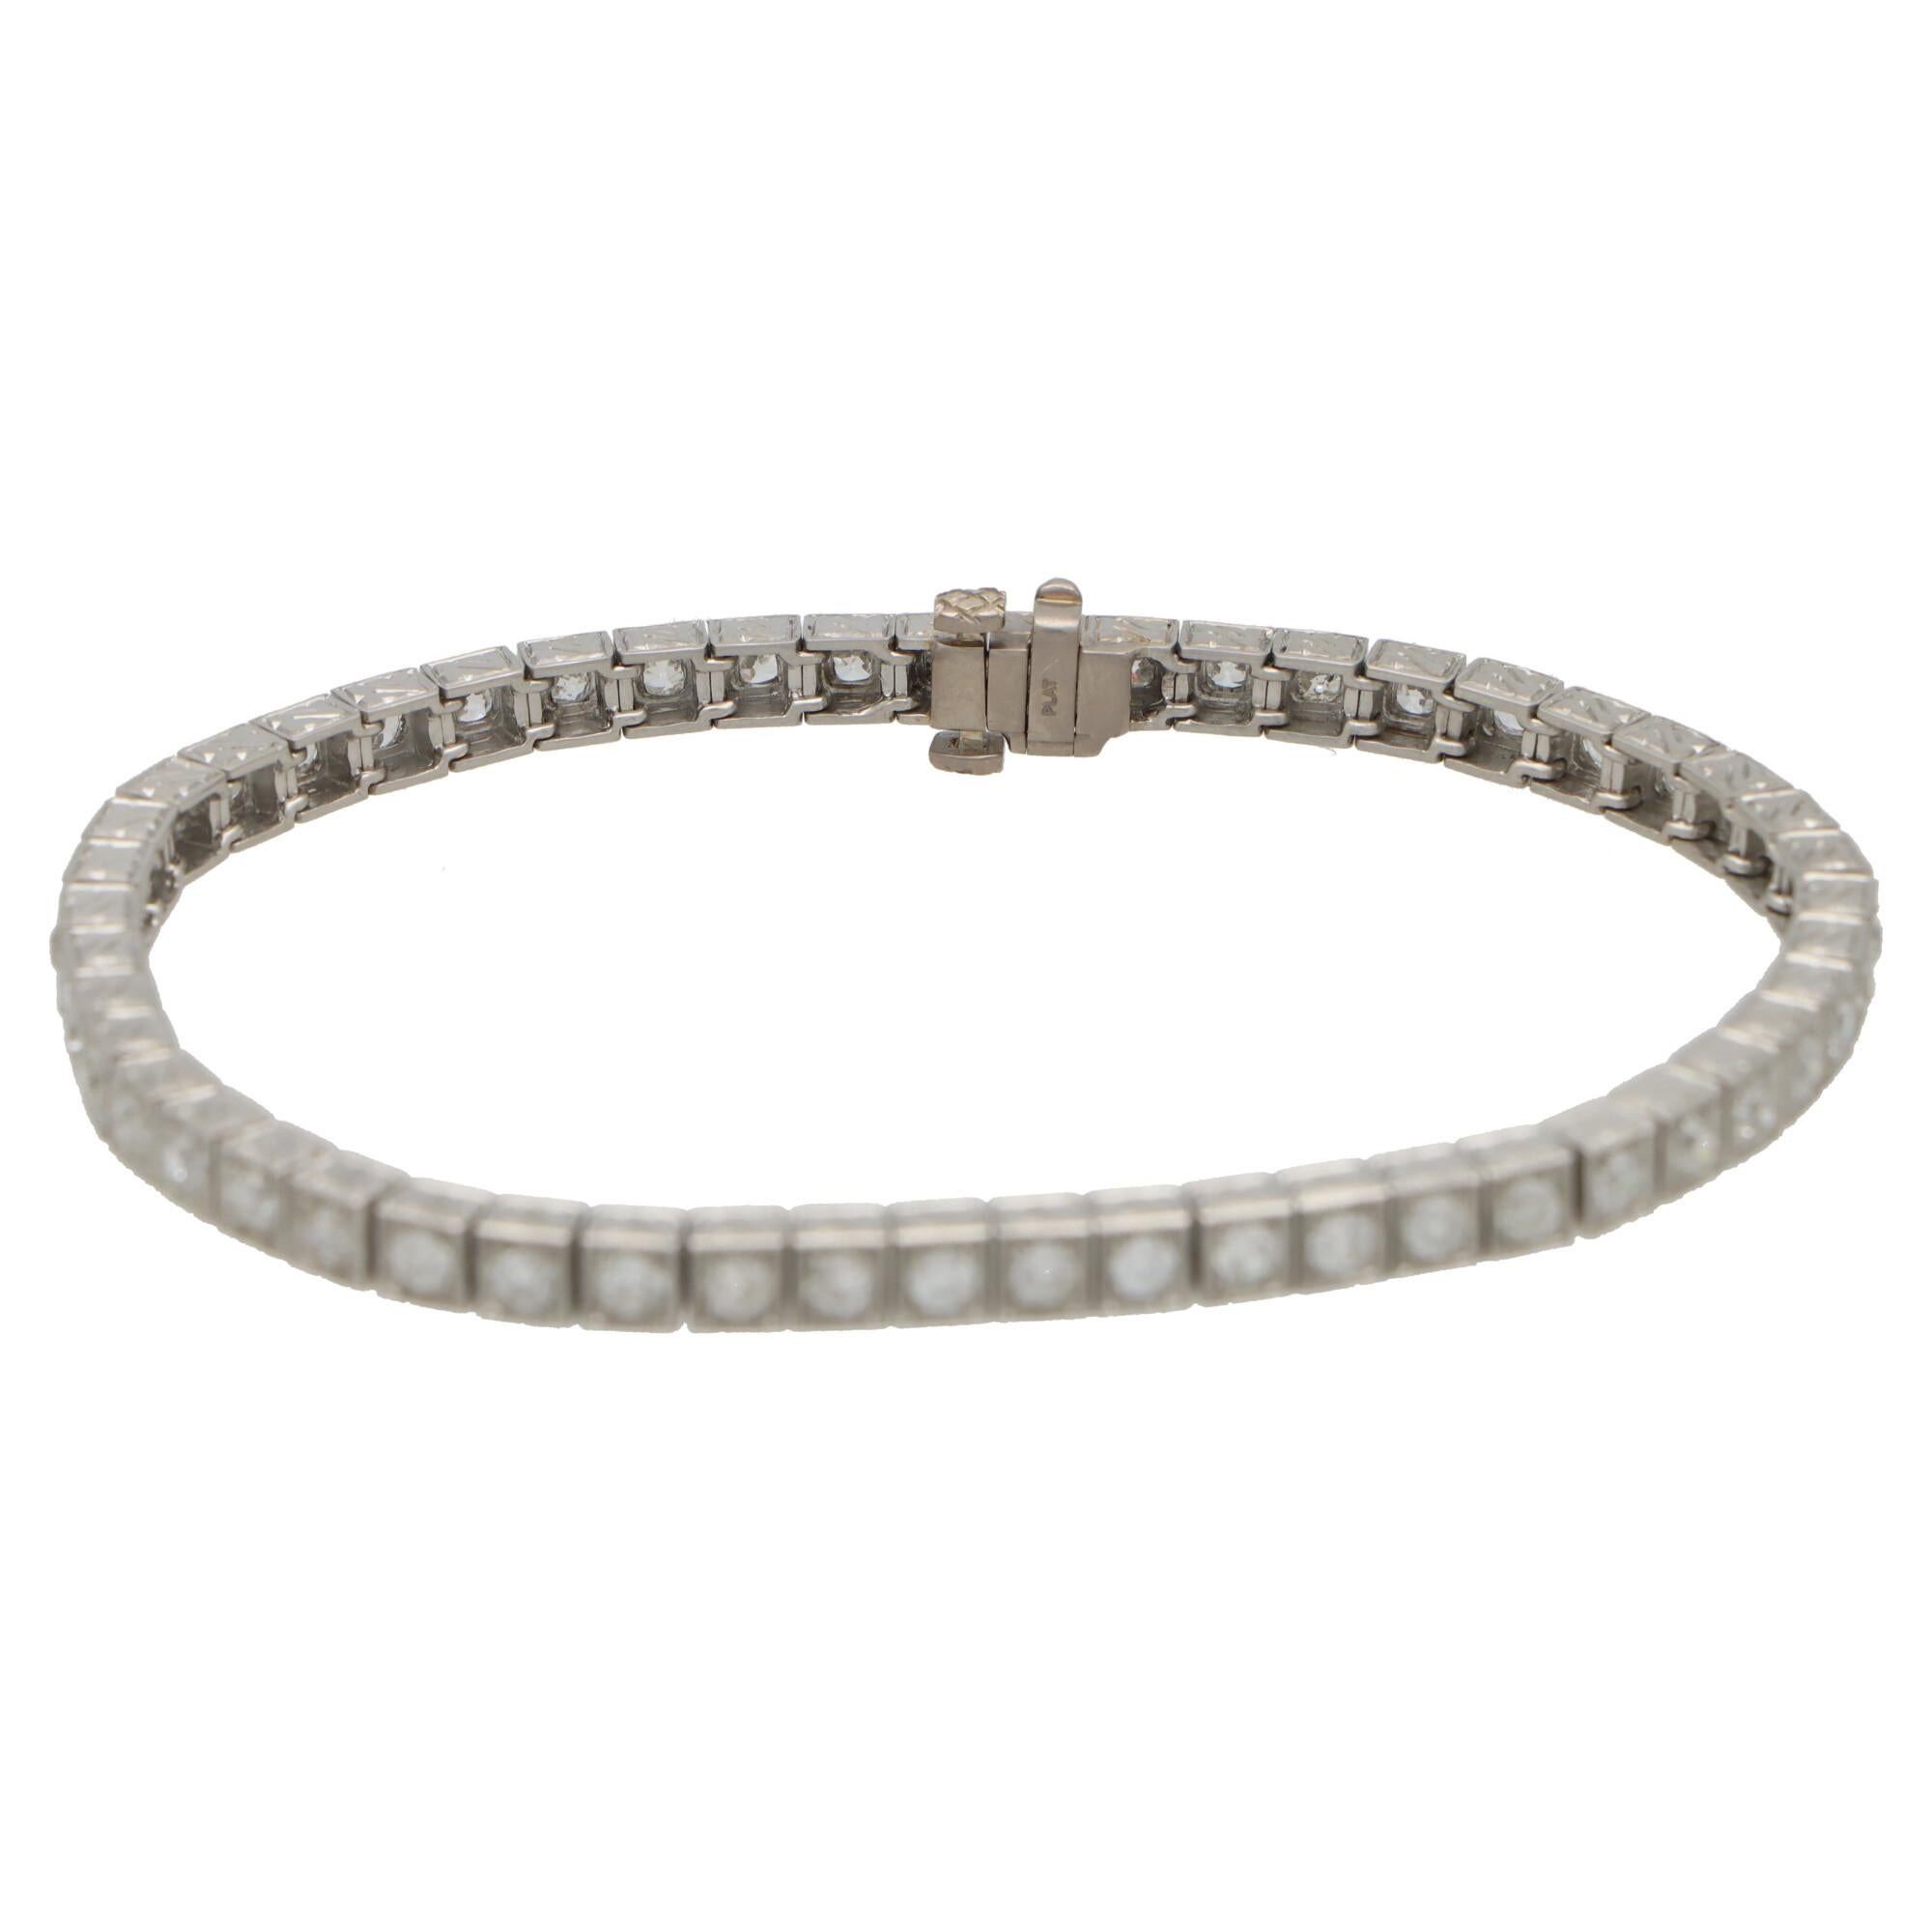 3.04 Carat Old Cut Diamond Line Tennis Bracelet in Platinum In Excellent Condition For Sale In London, GB